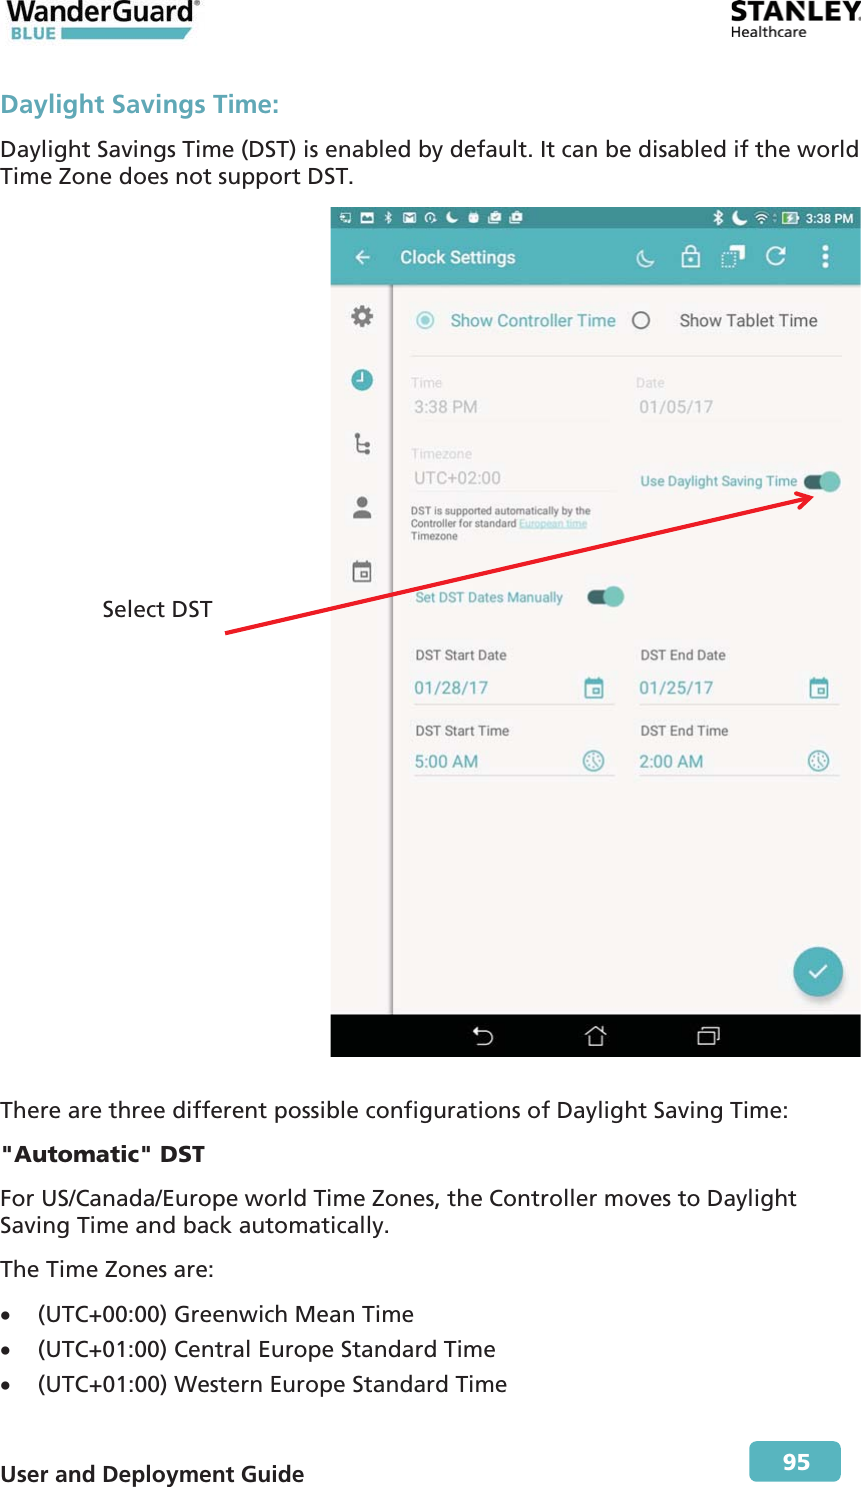  User and Deployment Guide        95 Daylight Savings Time: Daylight Savings Time (DST) is enabled by default. It can be disabled if the world Time Zone does not support DST.   There are three different possible configurations of Daylight Saving Time: &quot;Automatic&quot; DST For US/Canada/Europe world Time Zones, the Controller moves to Daylight Saving Time and back automatically. The Time Zones are: x (UTC+00:00) Greenwich Mean Time x (UTC+01:00) Central Europe Standard Time x (UTC+01:00) Western Europe Standard Time Select DST 